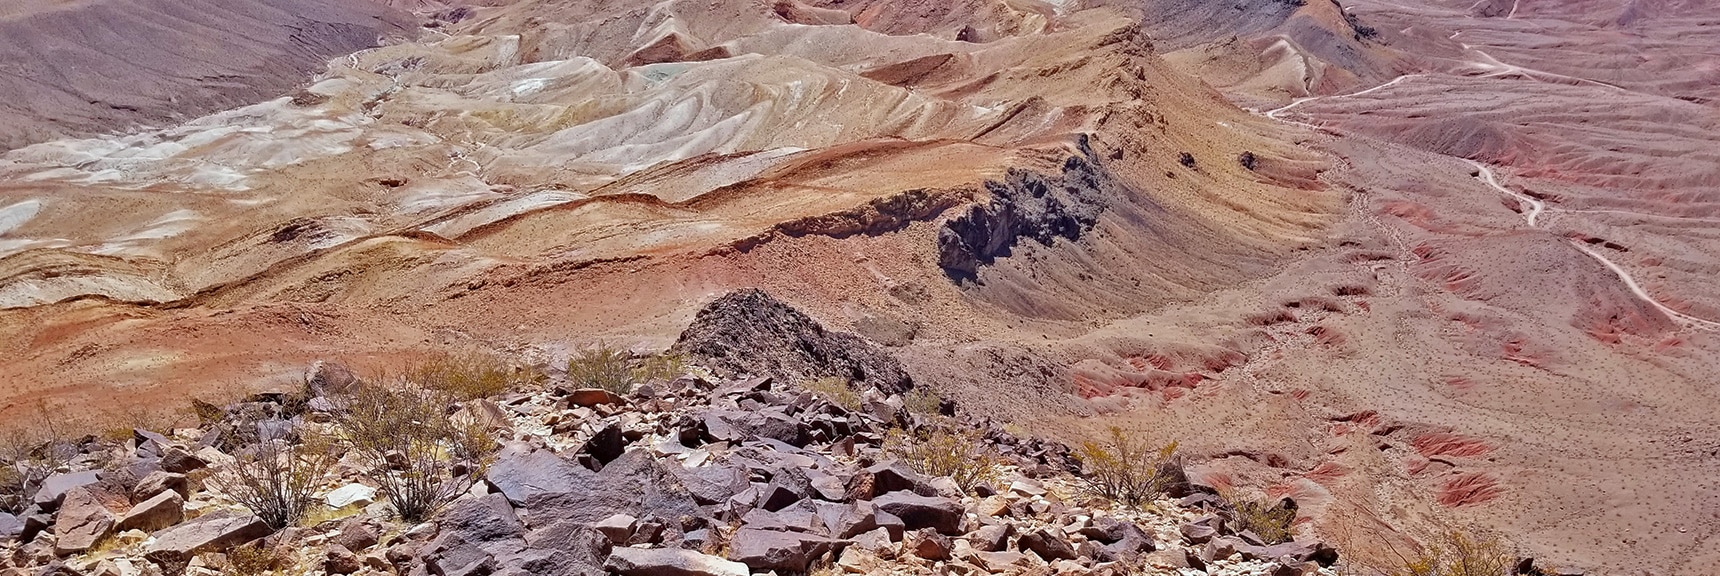 View Down South Ridge from the Summit | Lava Butte | Lake Mead National Recreation Area, Nevada